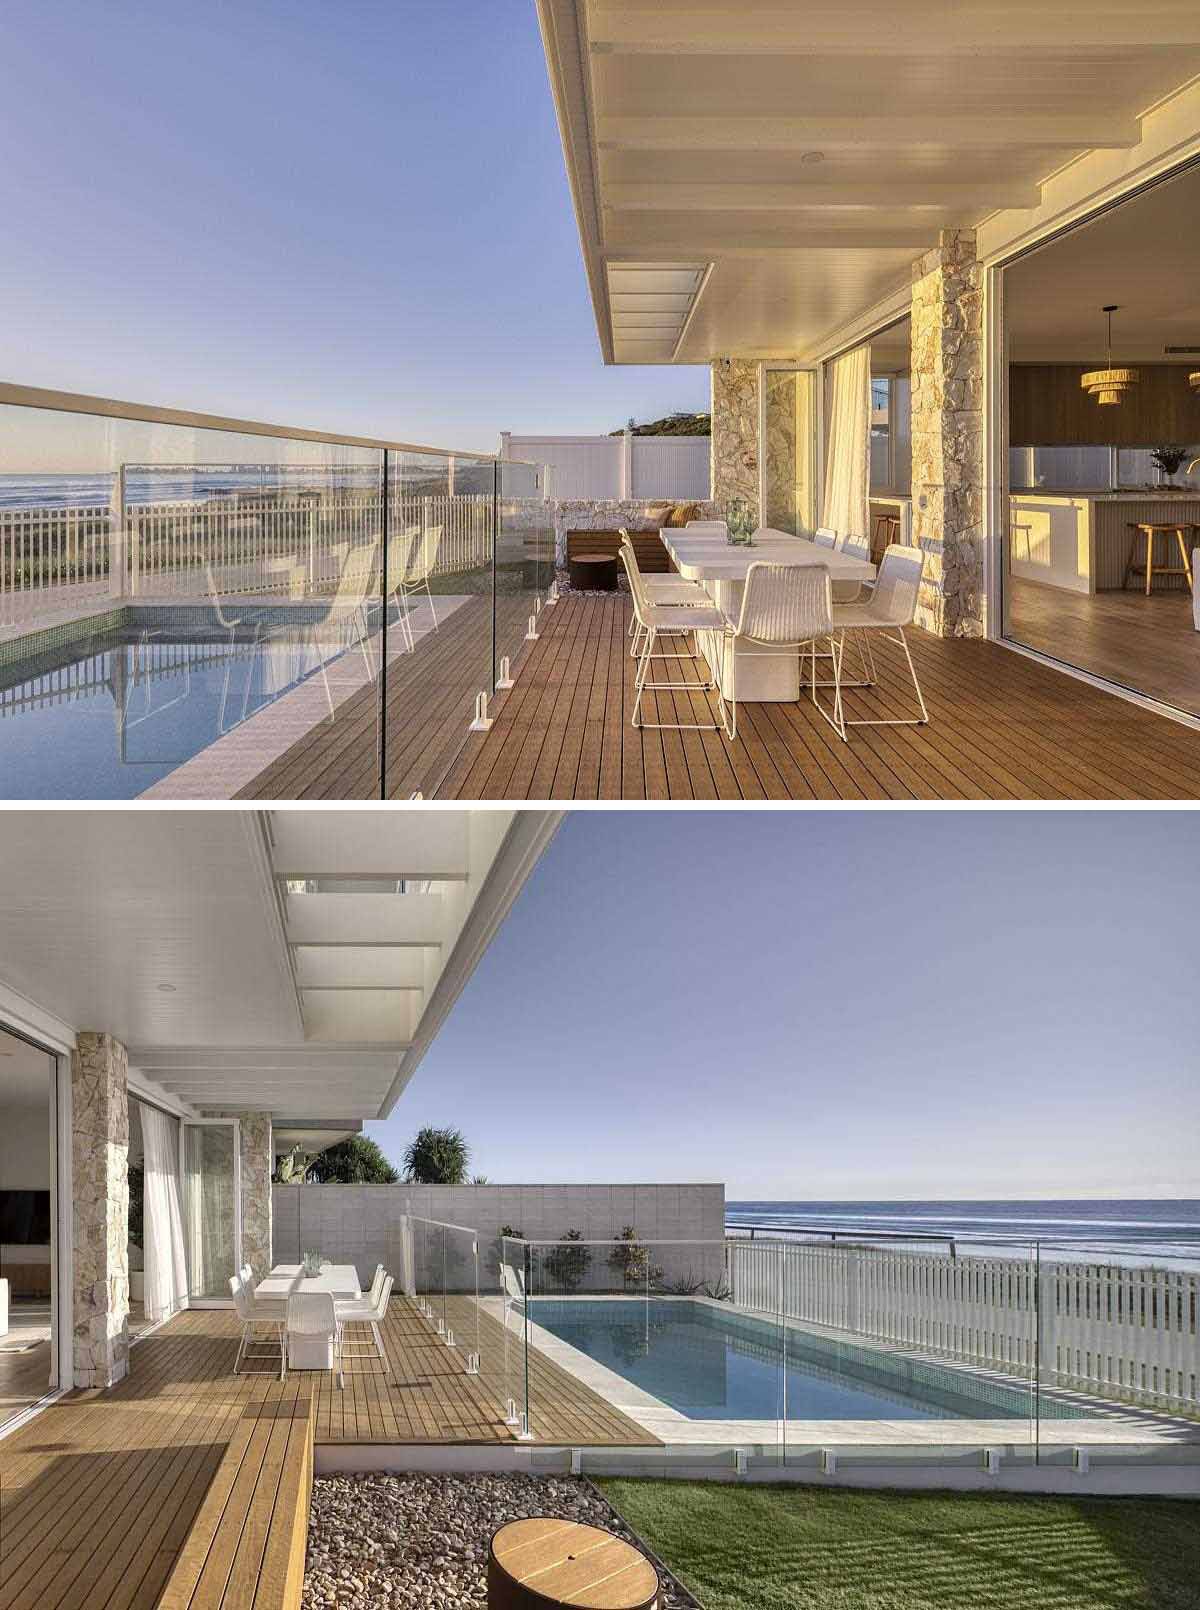 A modern coastal home with a designated outdoor space area for sitting, dining, and a swimming pool.